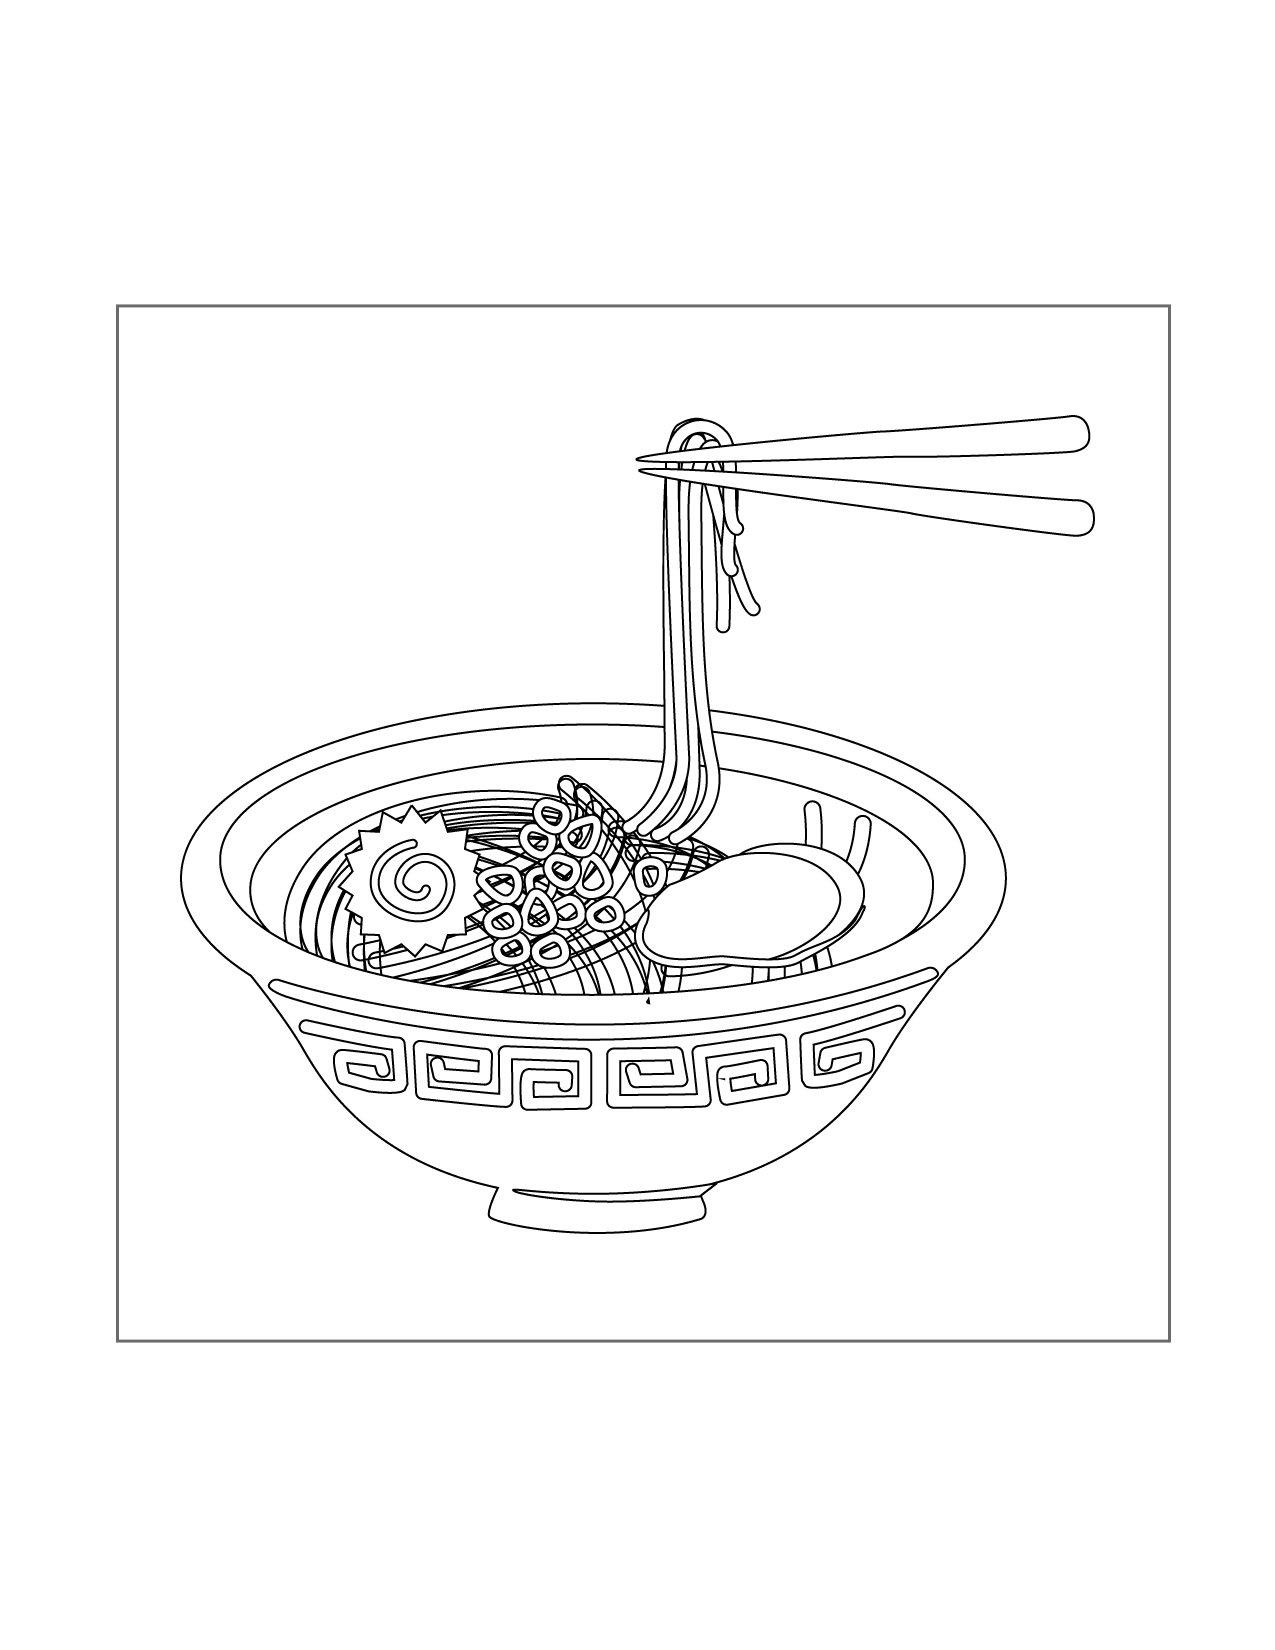 Bowl Of Ramen Coloring Page